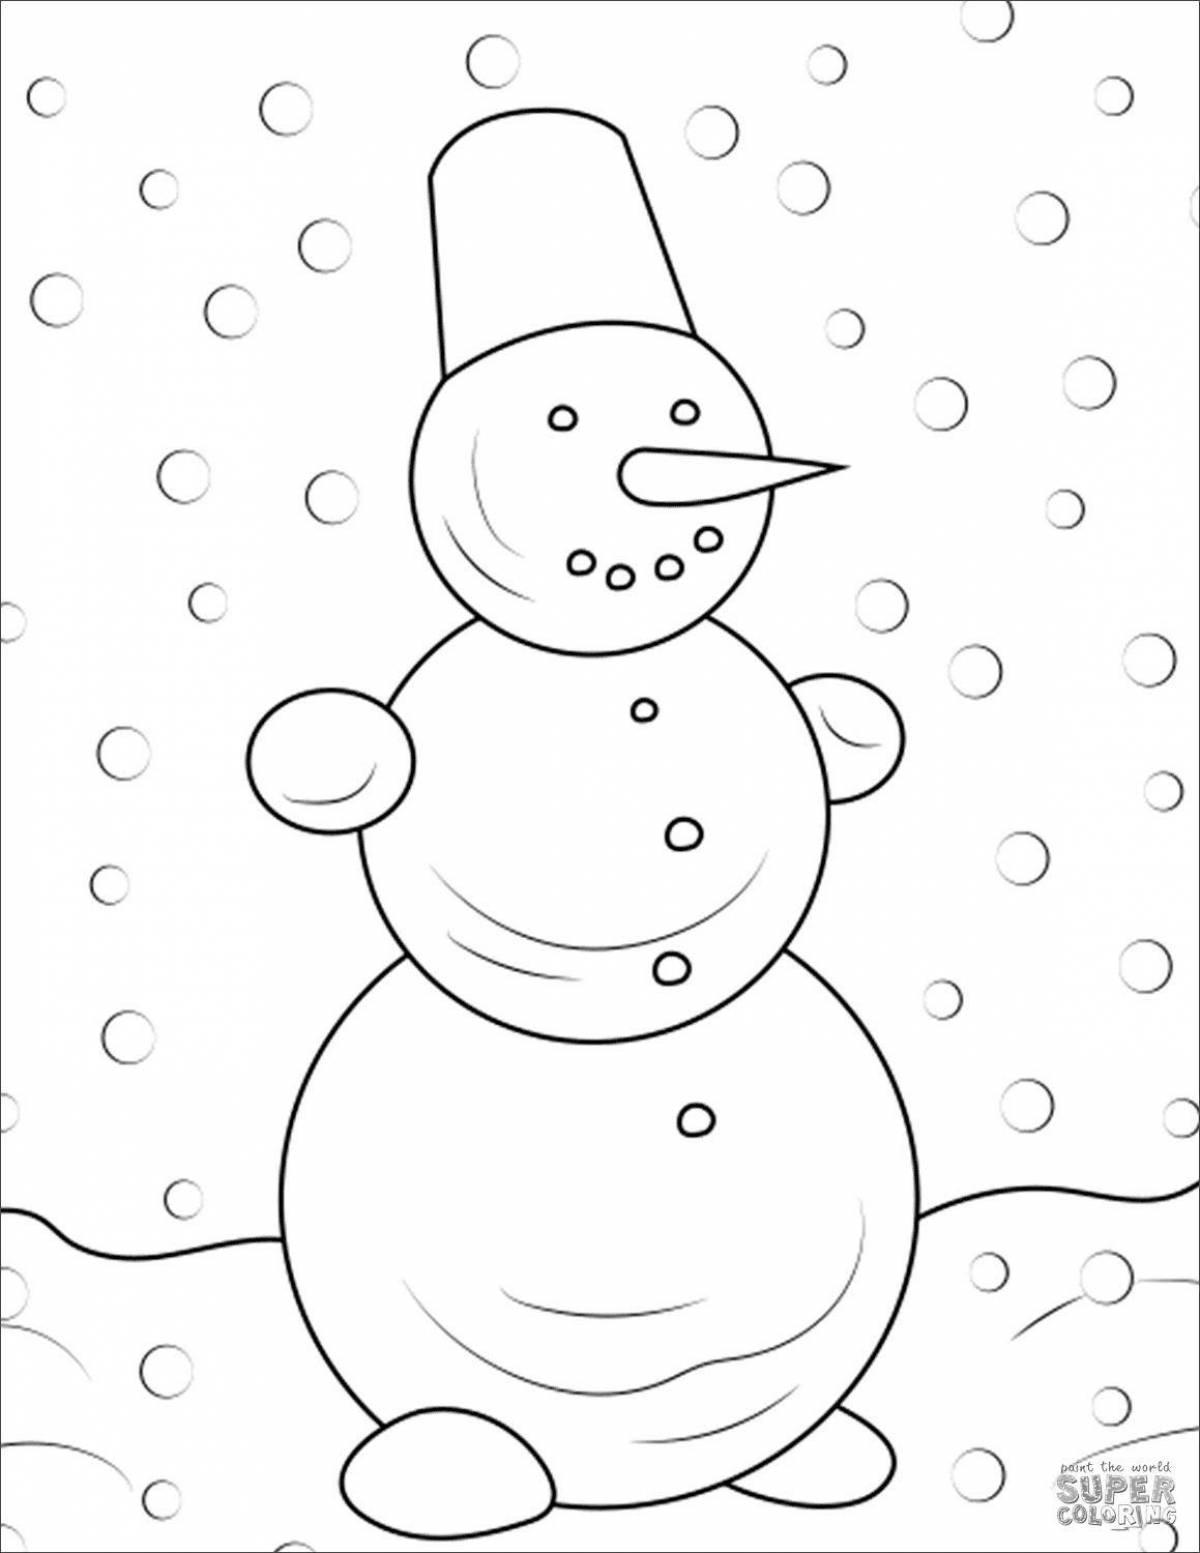 Glorious winter coloring book for 2-3 year olds